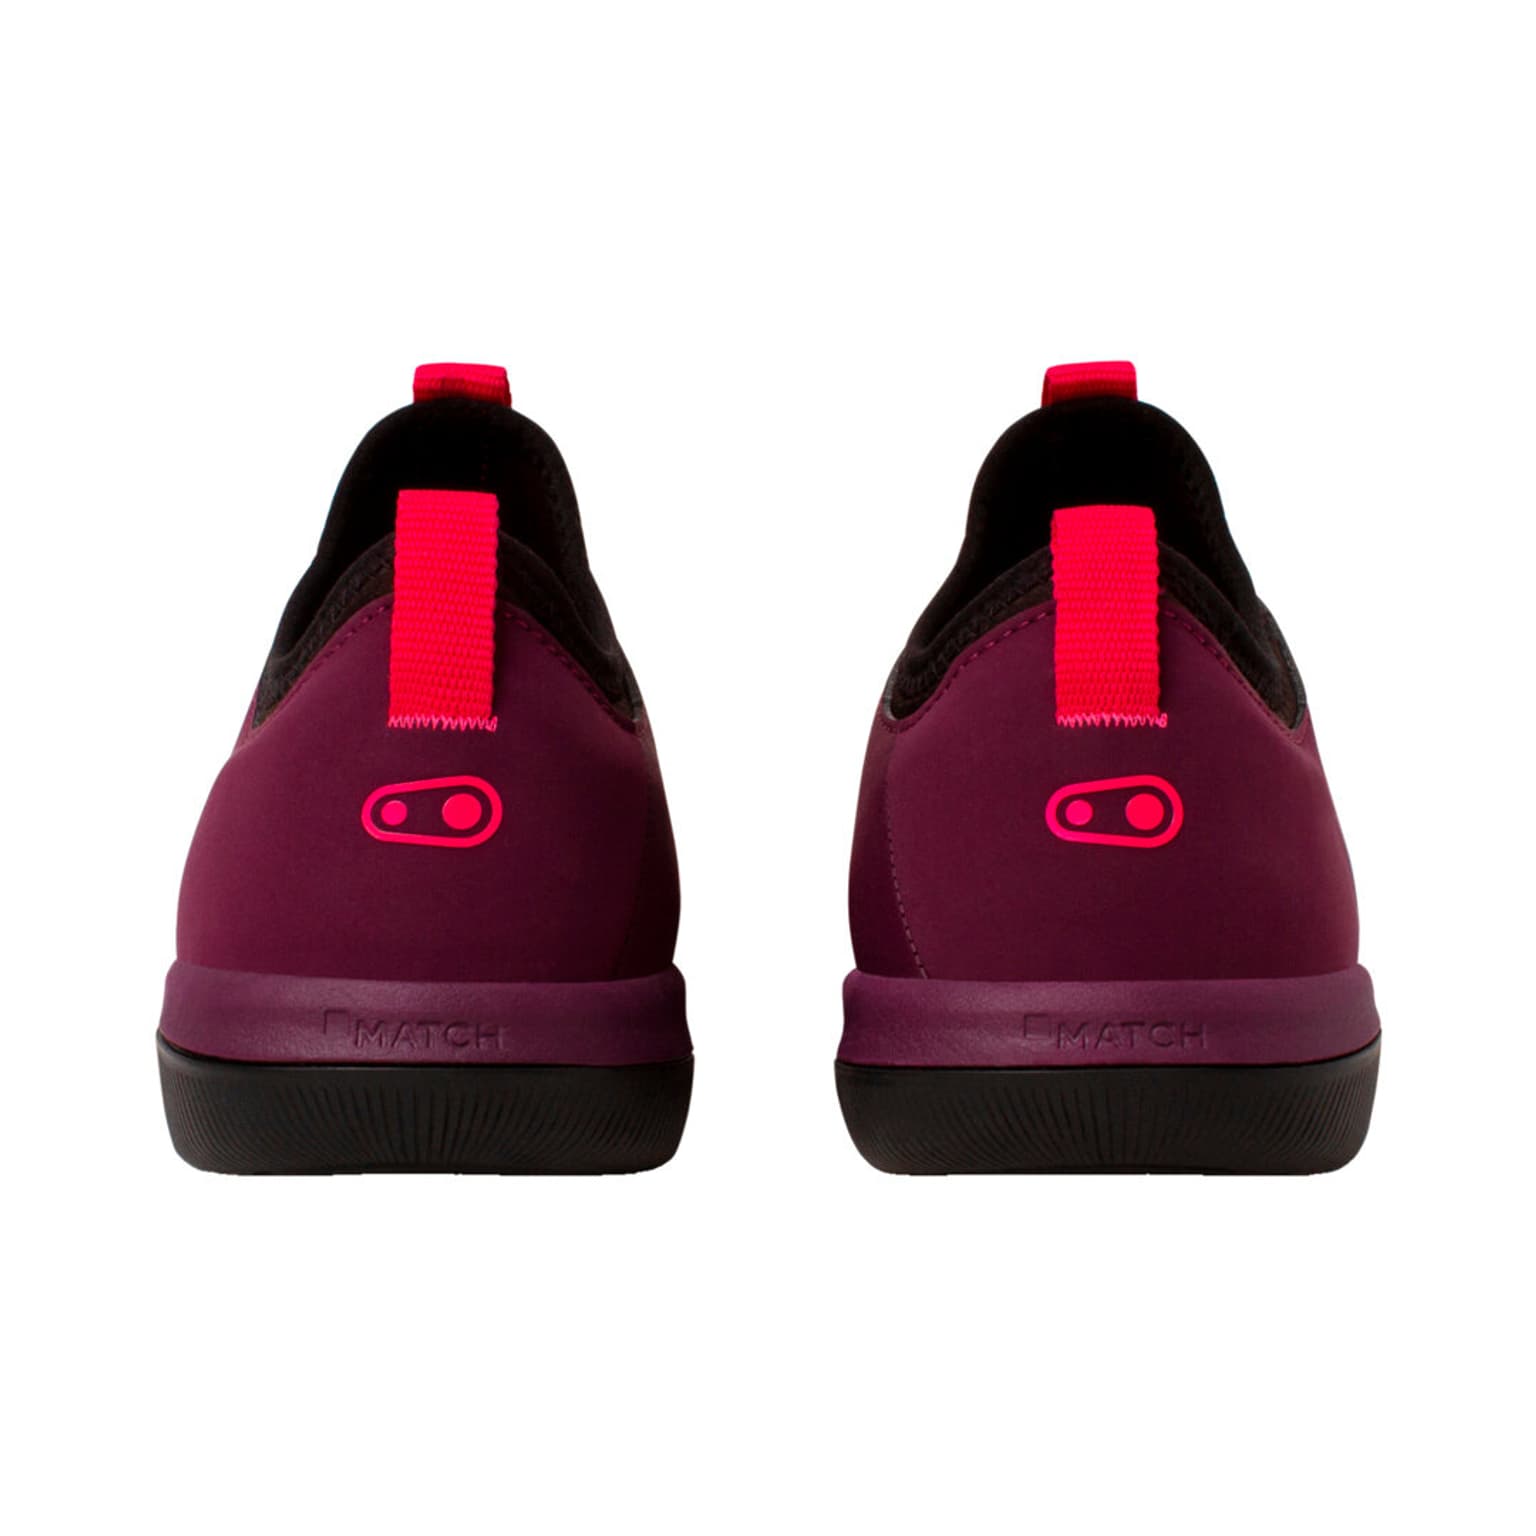 crankbrothers crankbrothers Stamp Street Lace Chaussures de cyclisme aubergine 3